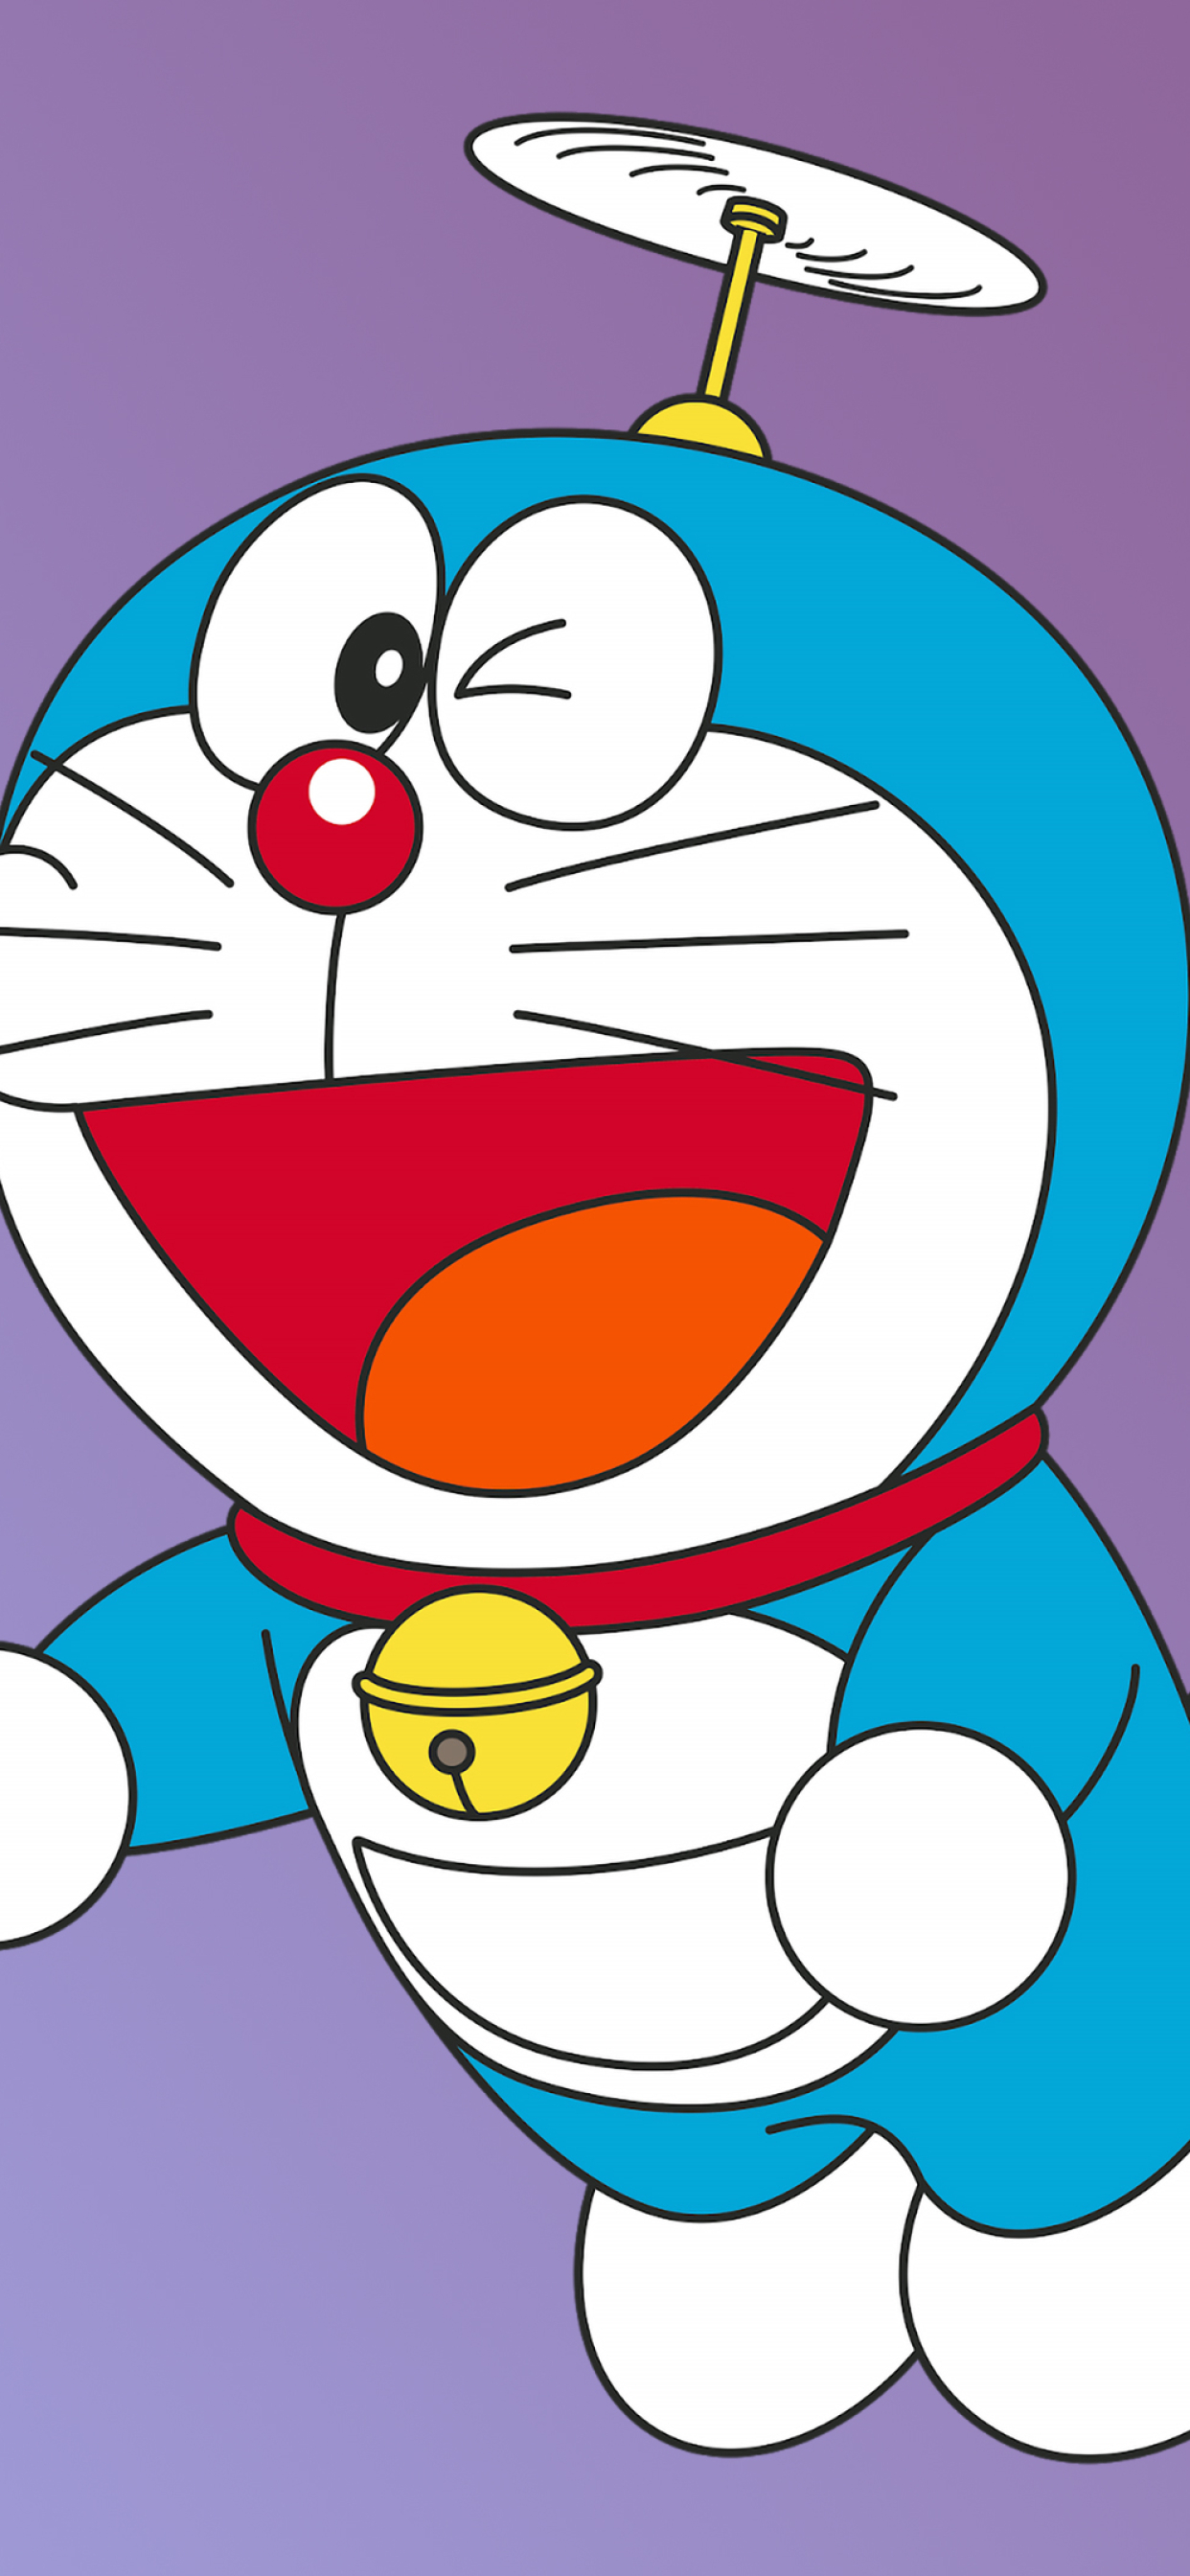 1242x26 Doraemon Minimal Iphone Xs Max Wallpaper Hd Cartoon 4k Wallpapers Images Photos And Background Wallpapers Den